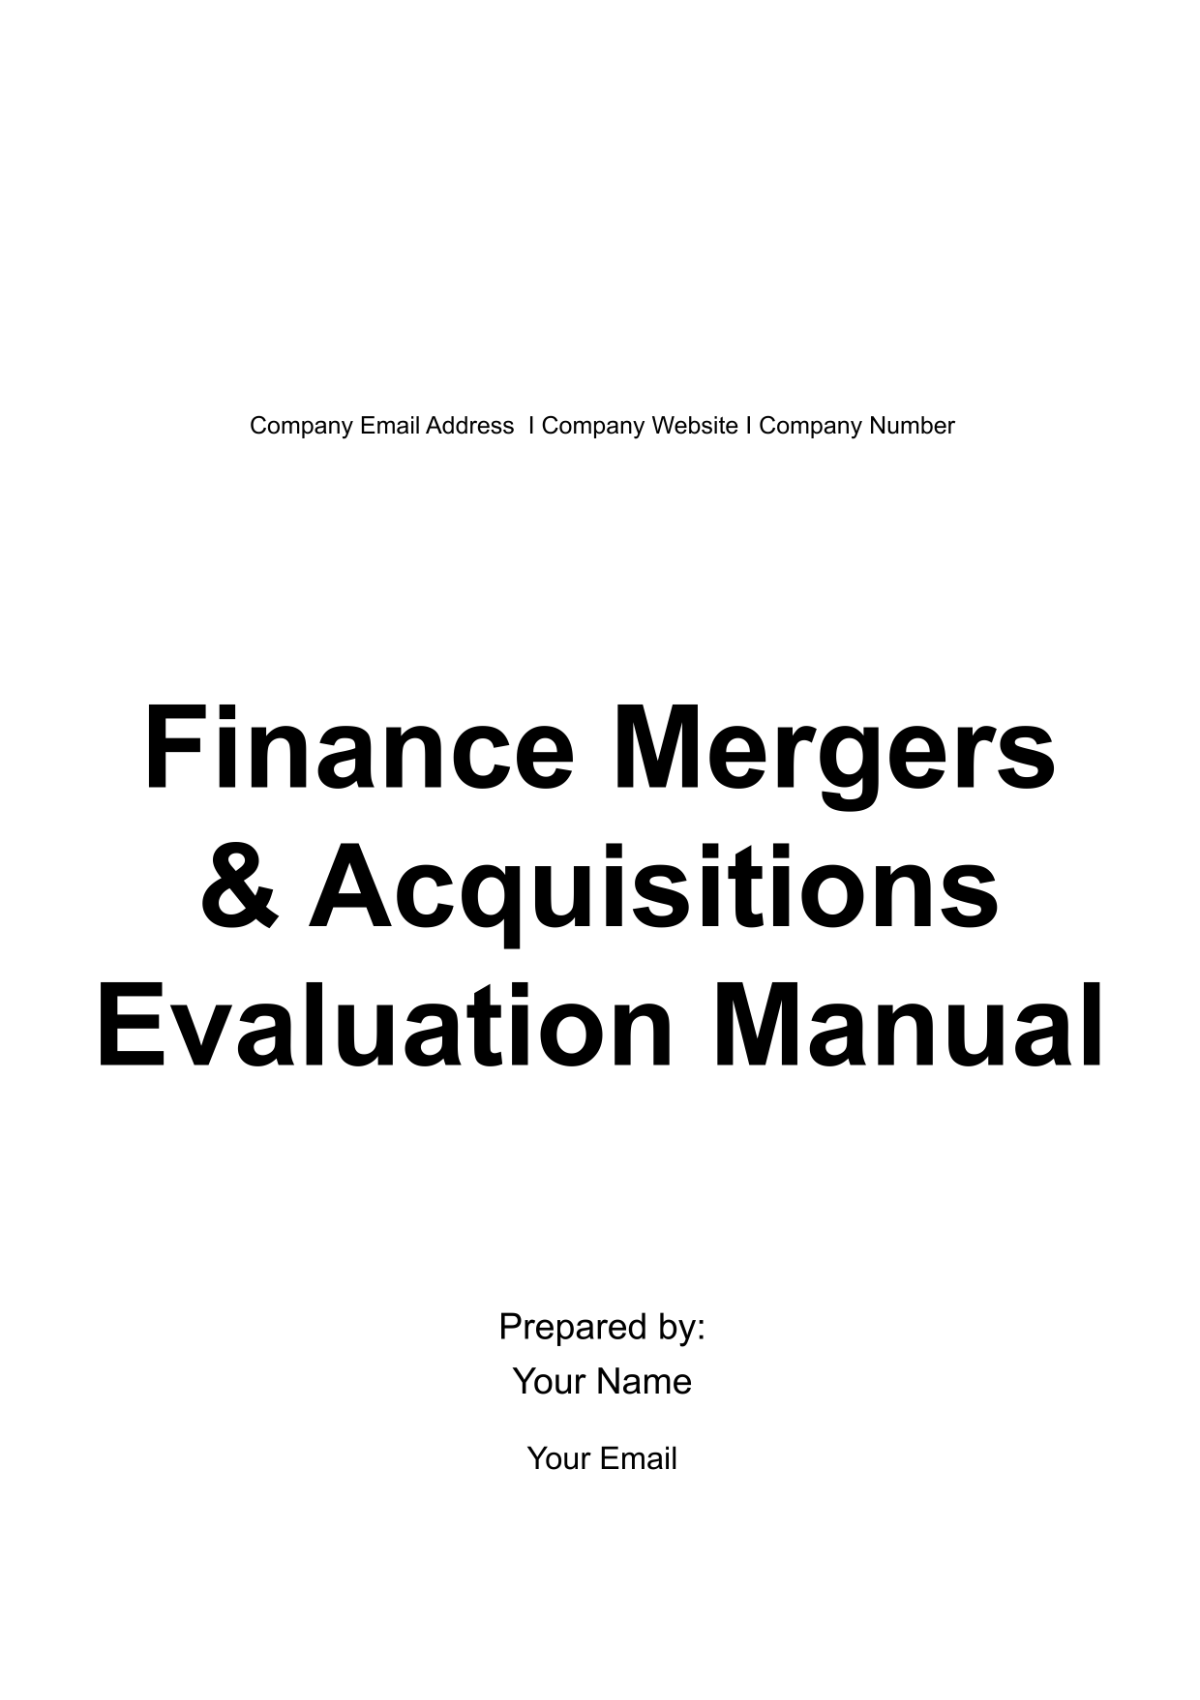 Finance Mergers & Acquisitions Evaluation Manual Template